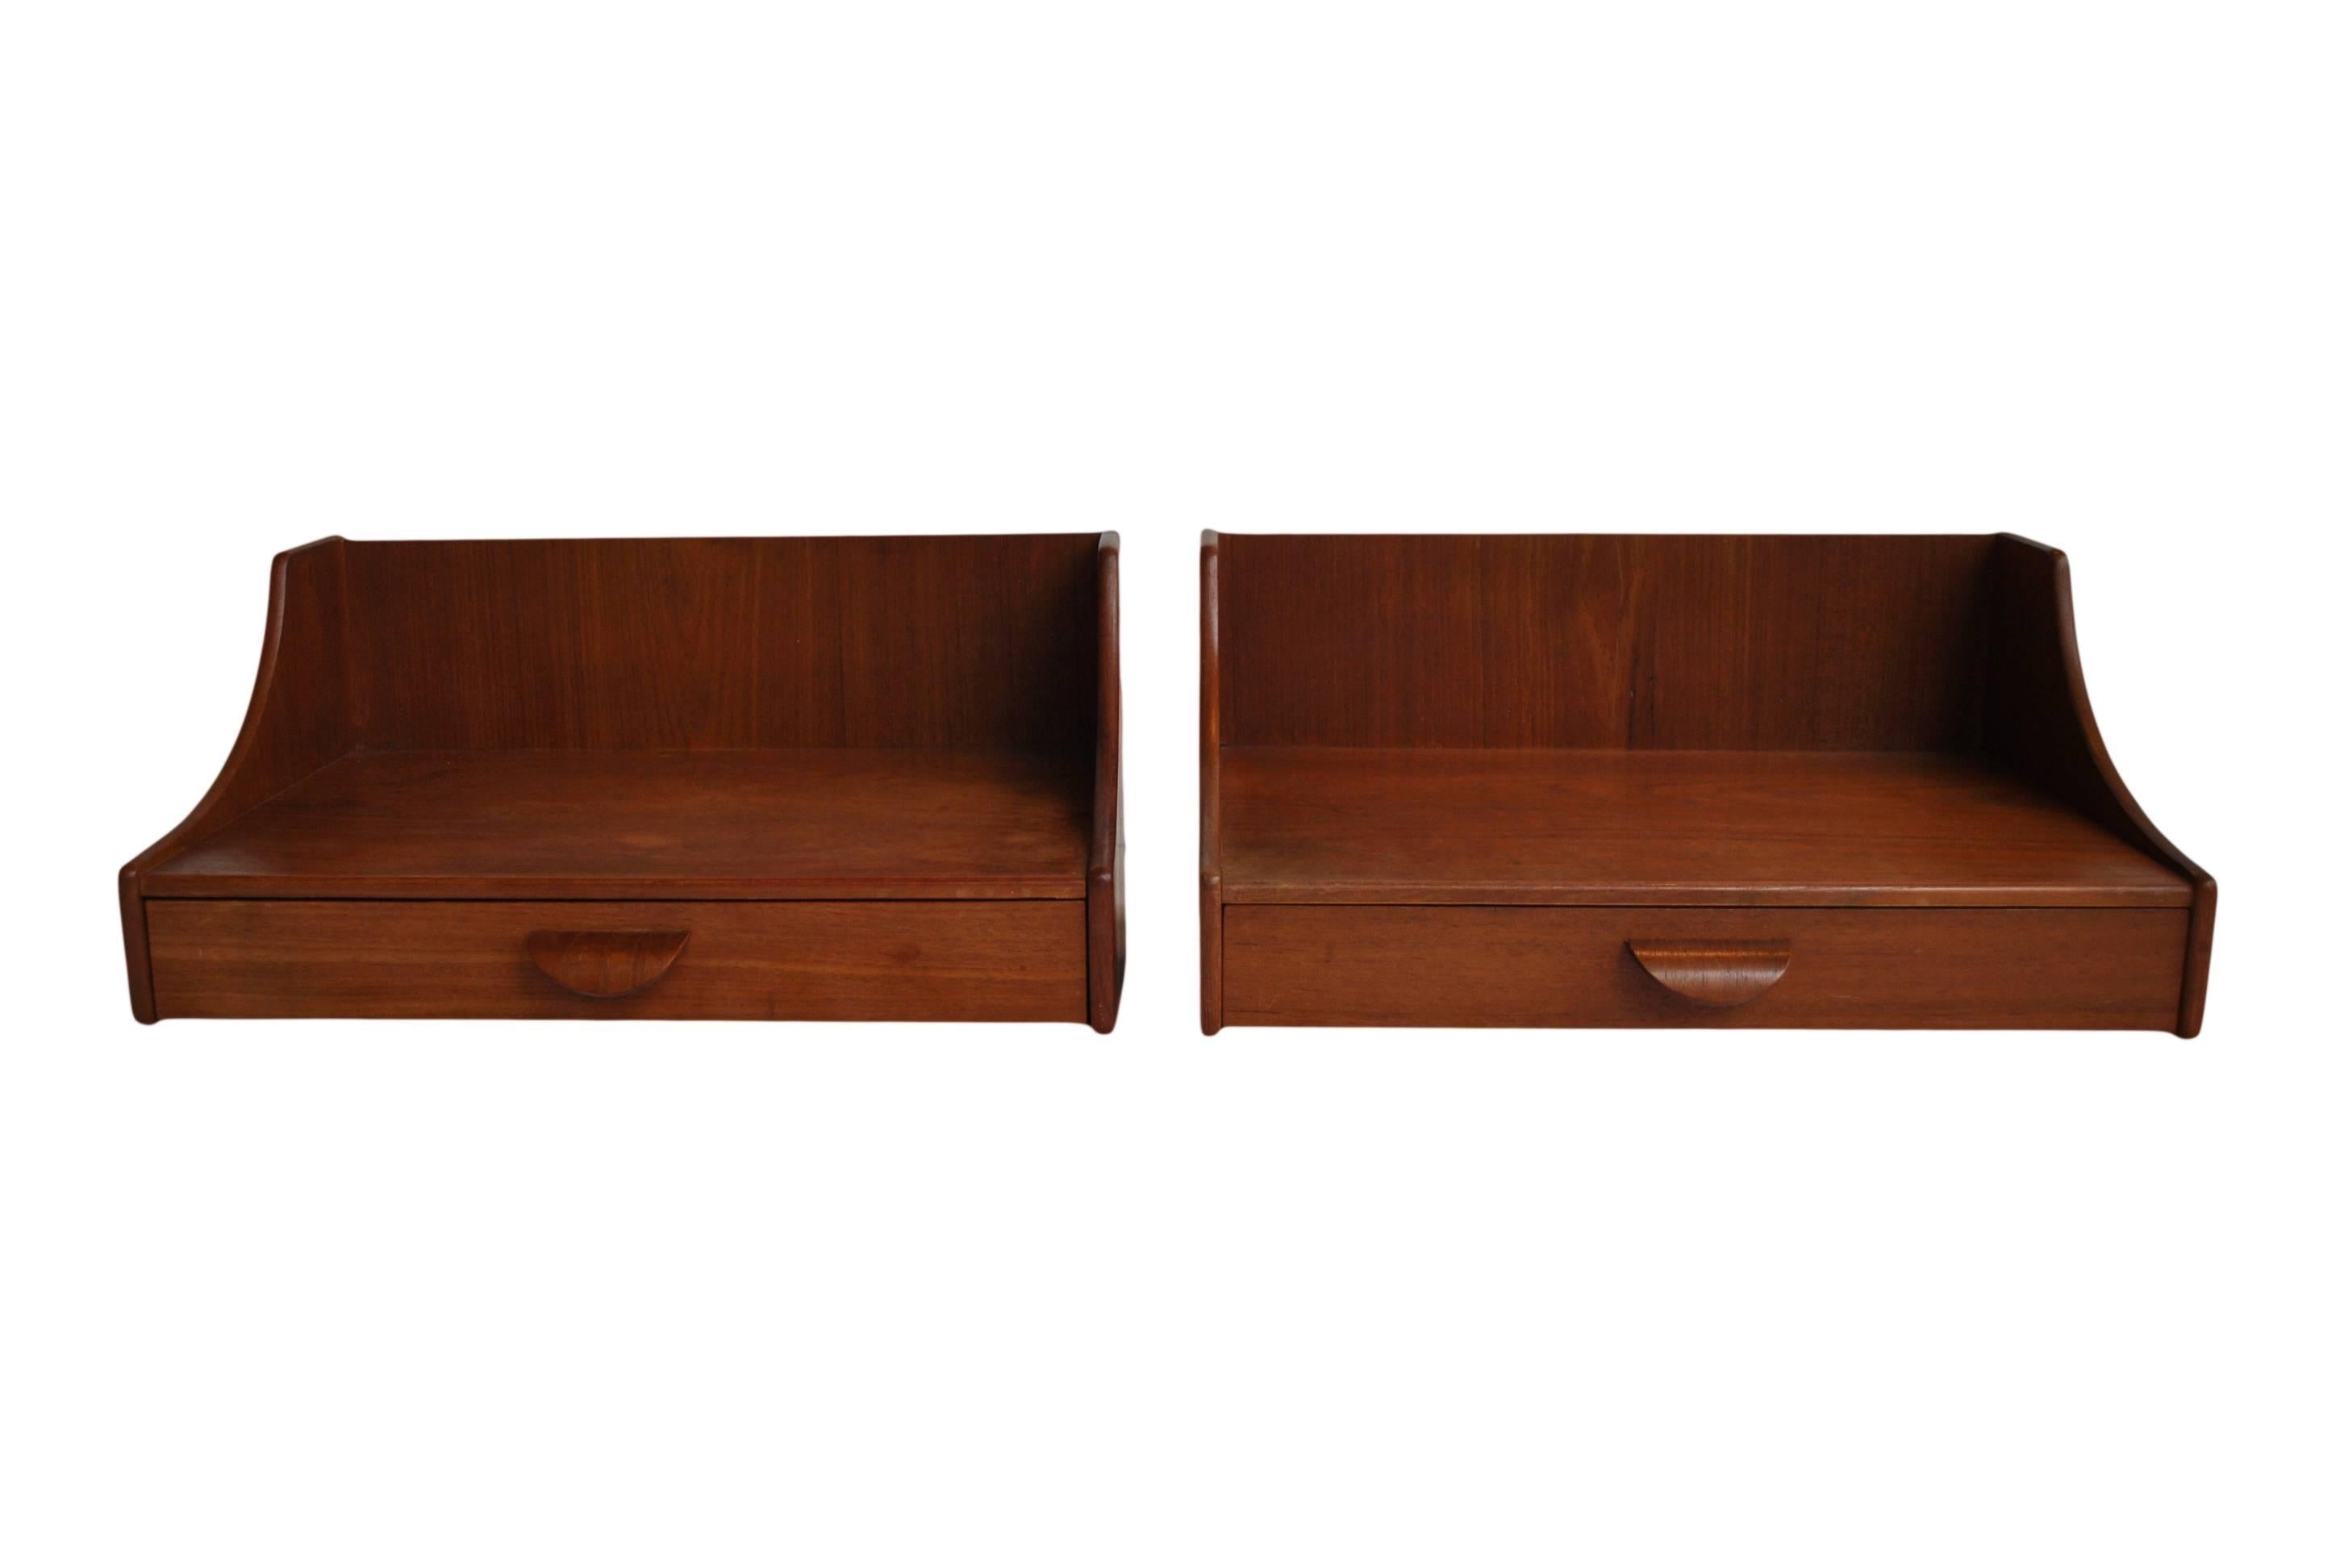 A pair of Floating Danish mid-century modern nightstands. Produced early 1960's in Teak. Clean sharp design.
